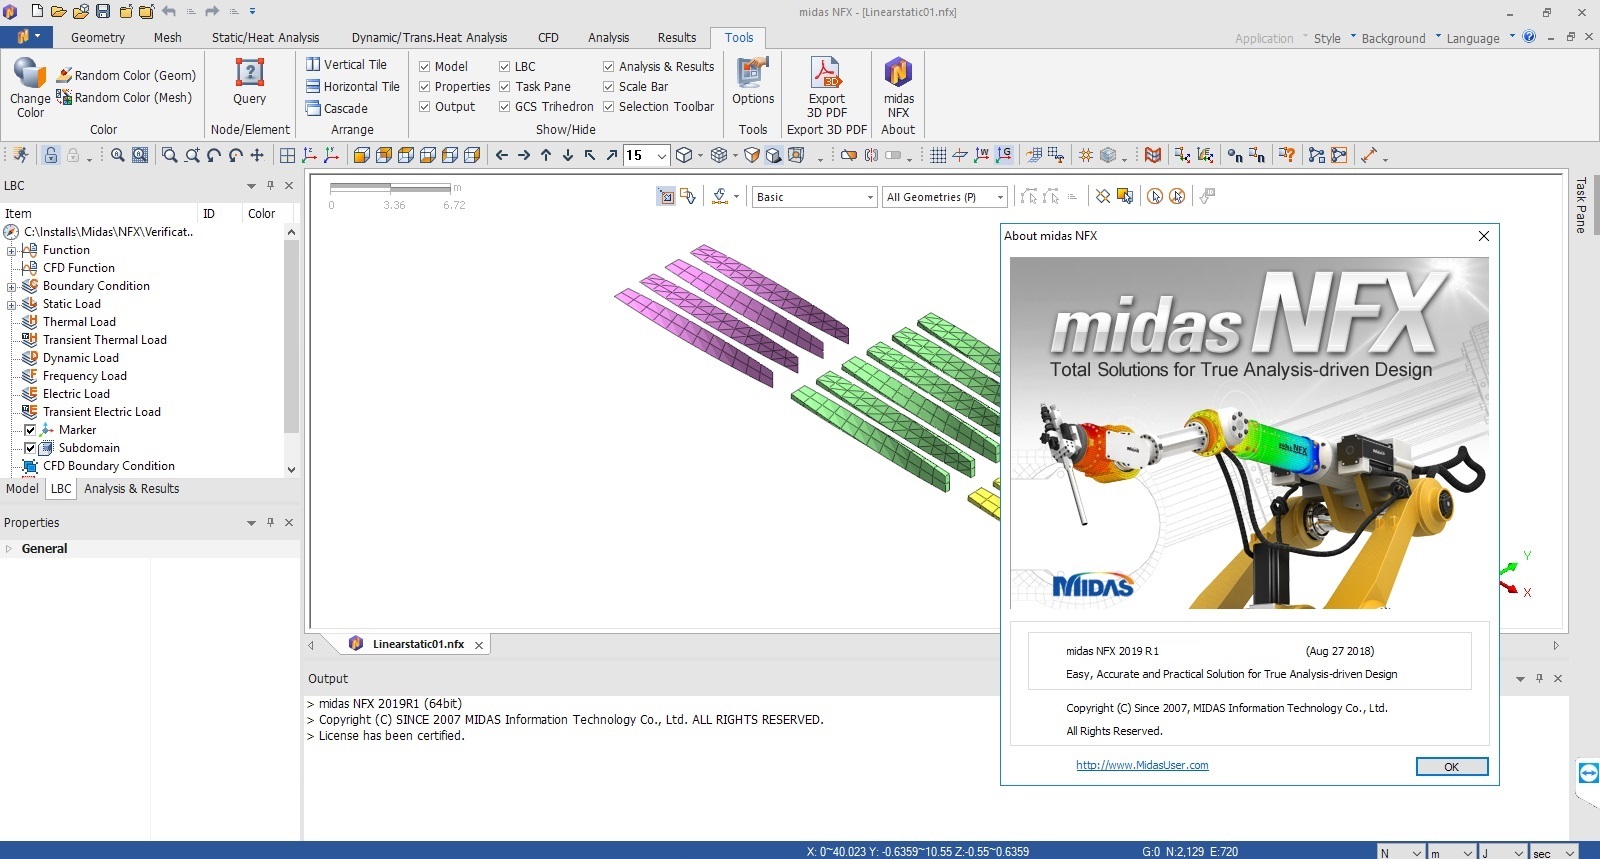 Working with midas NFX 2019 R1 (build 20180827) Win32 win64 full license